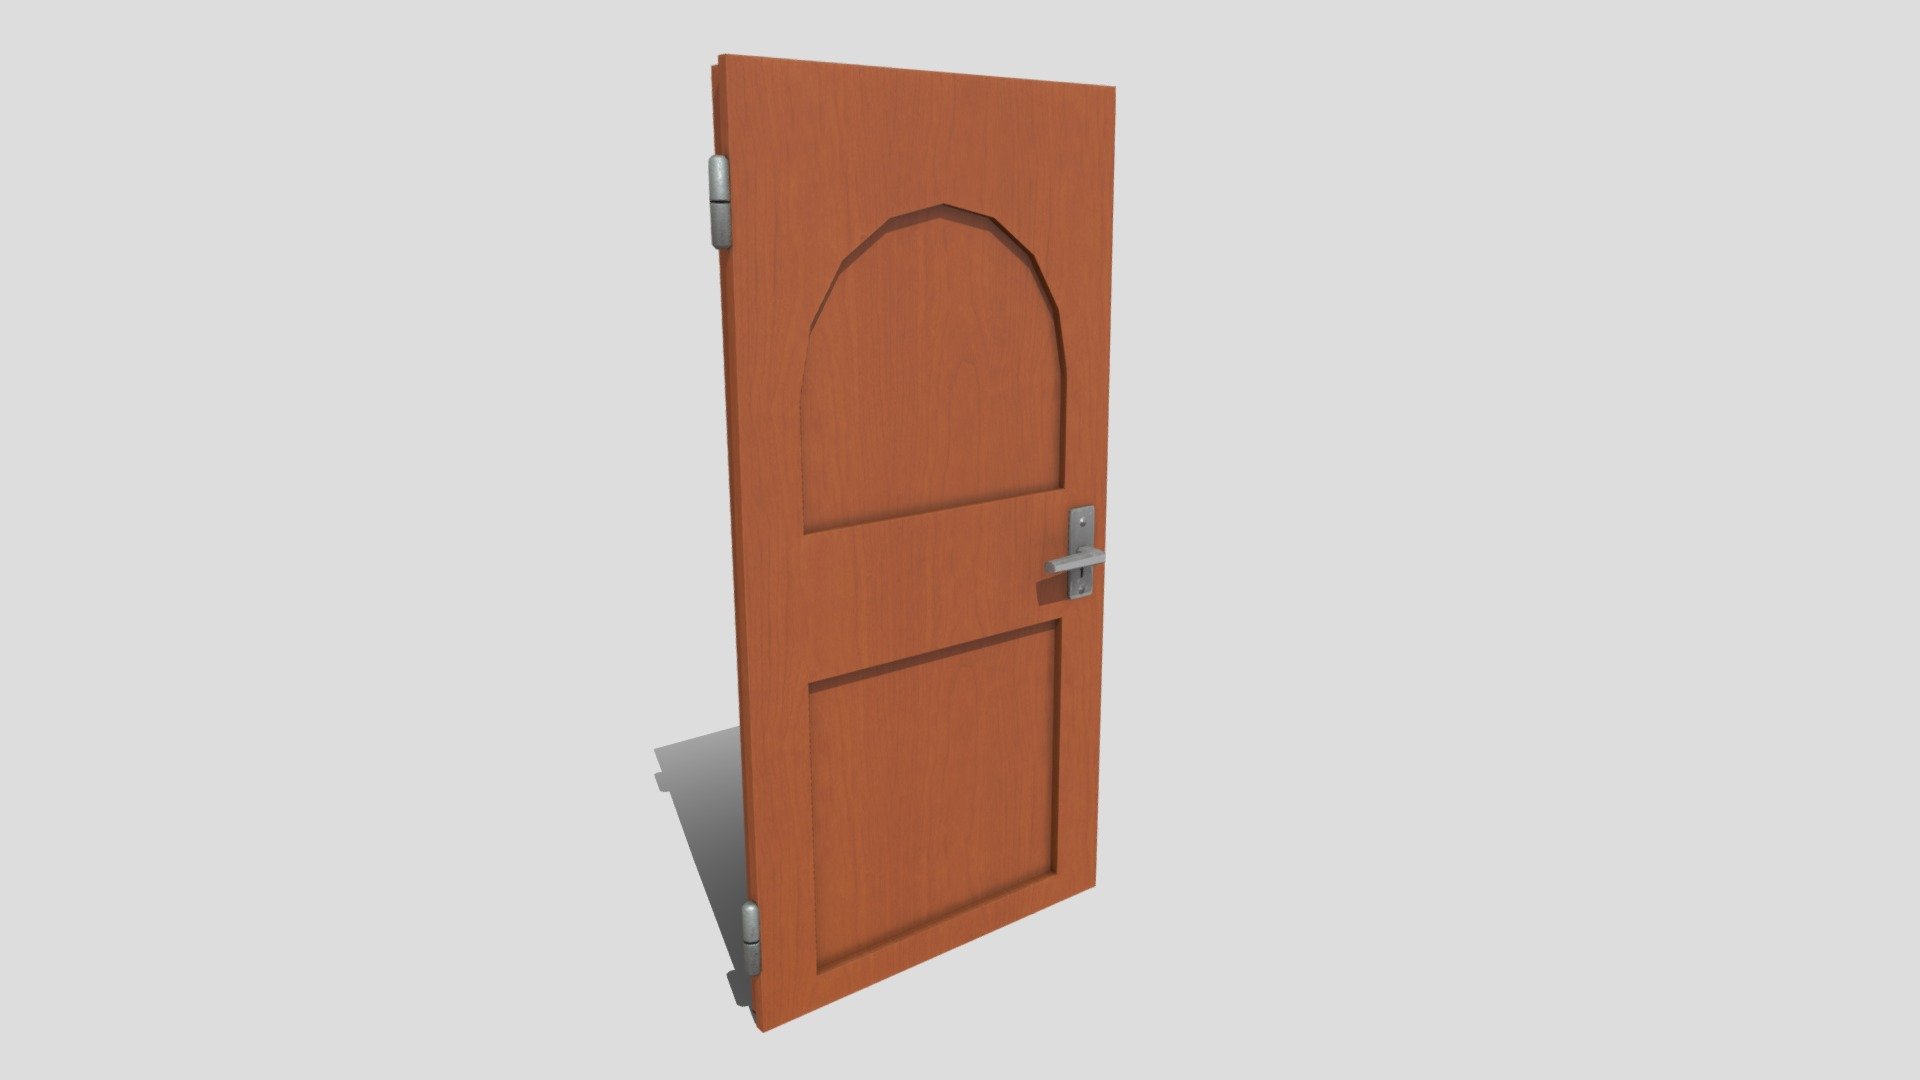 A wooden door in toon-style.

Contains the model and textures.

Check out our bundles and other models for more fitting objects 3d model